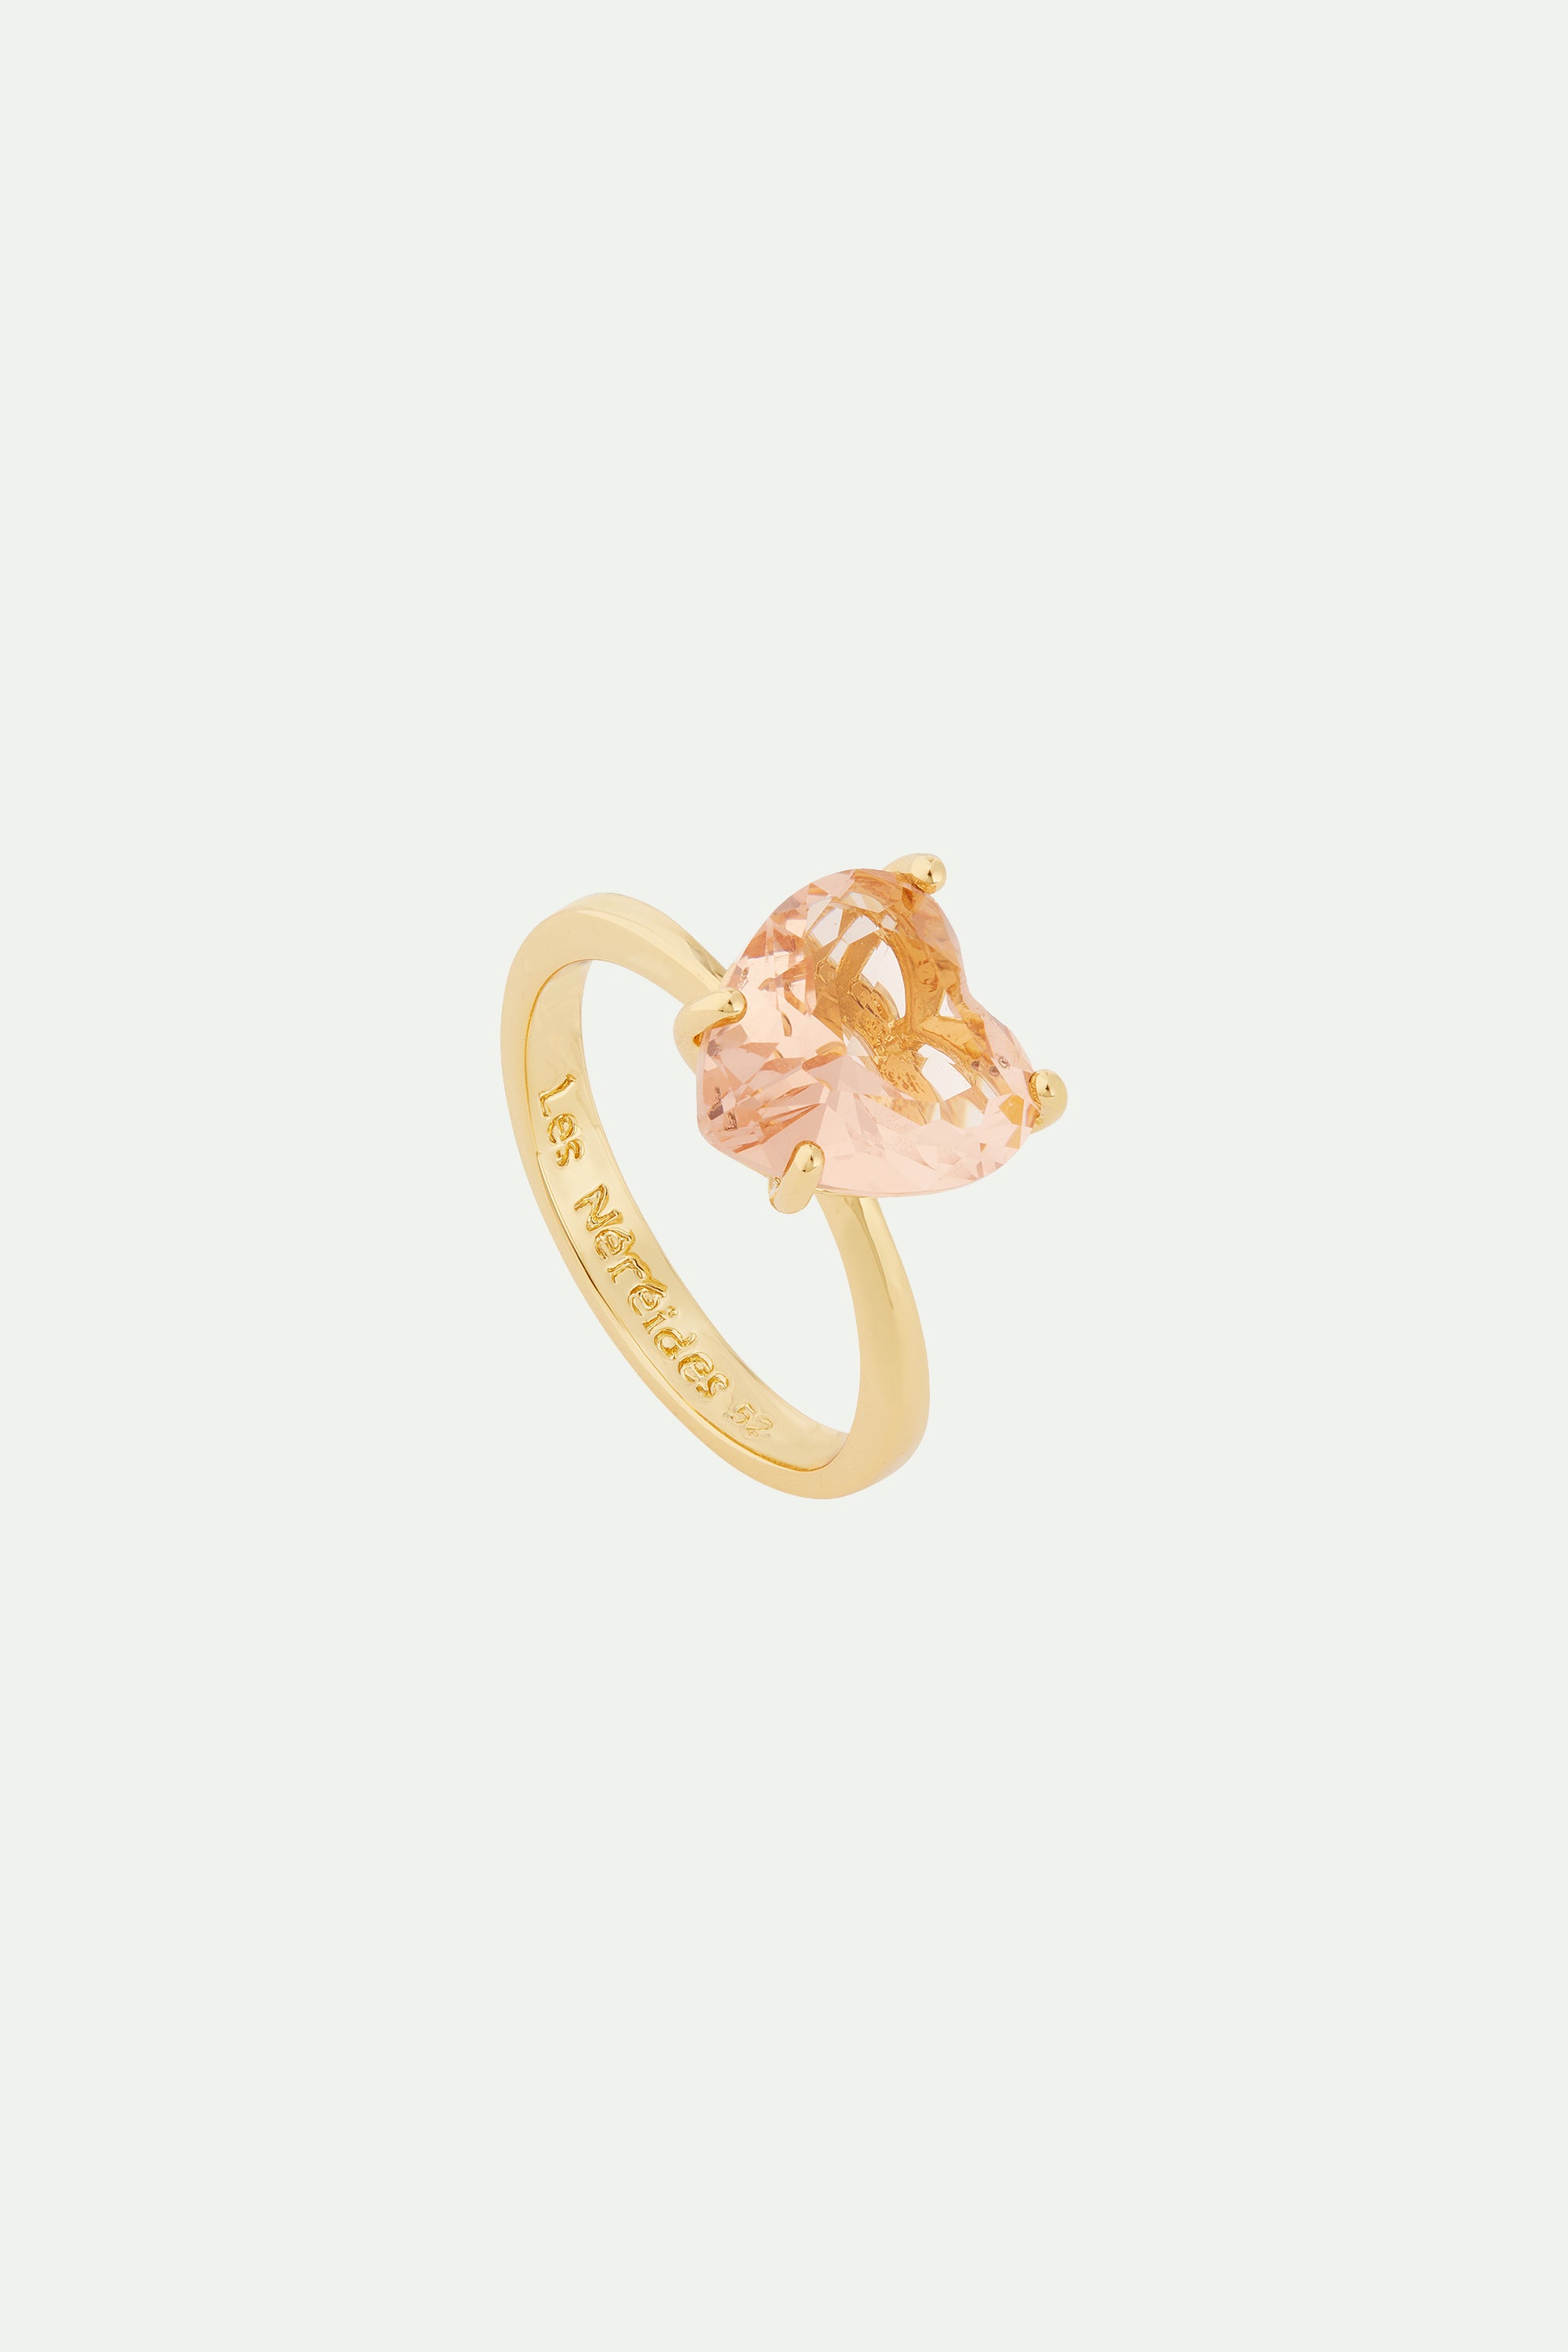 Apricot pink diamantine heart solitaire ring